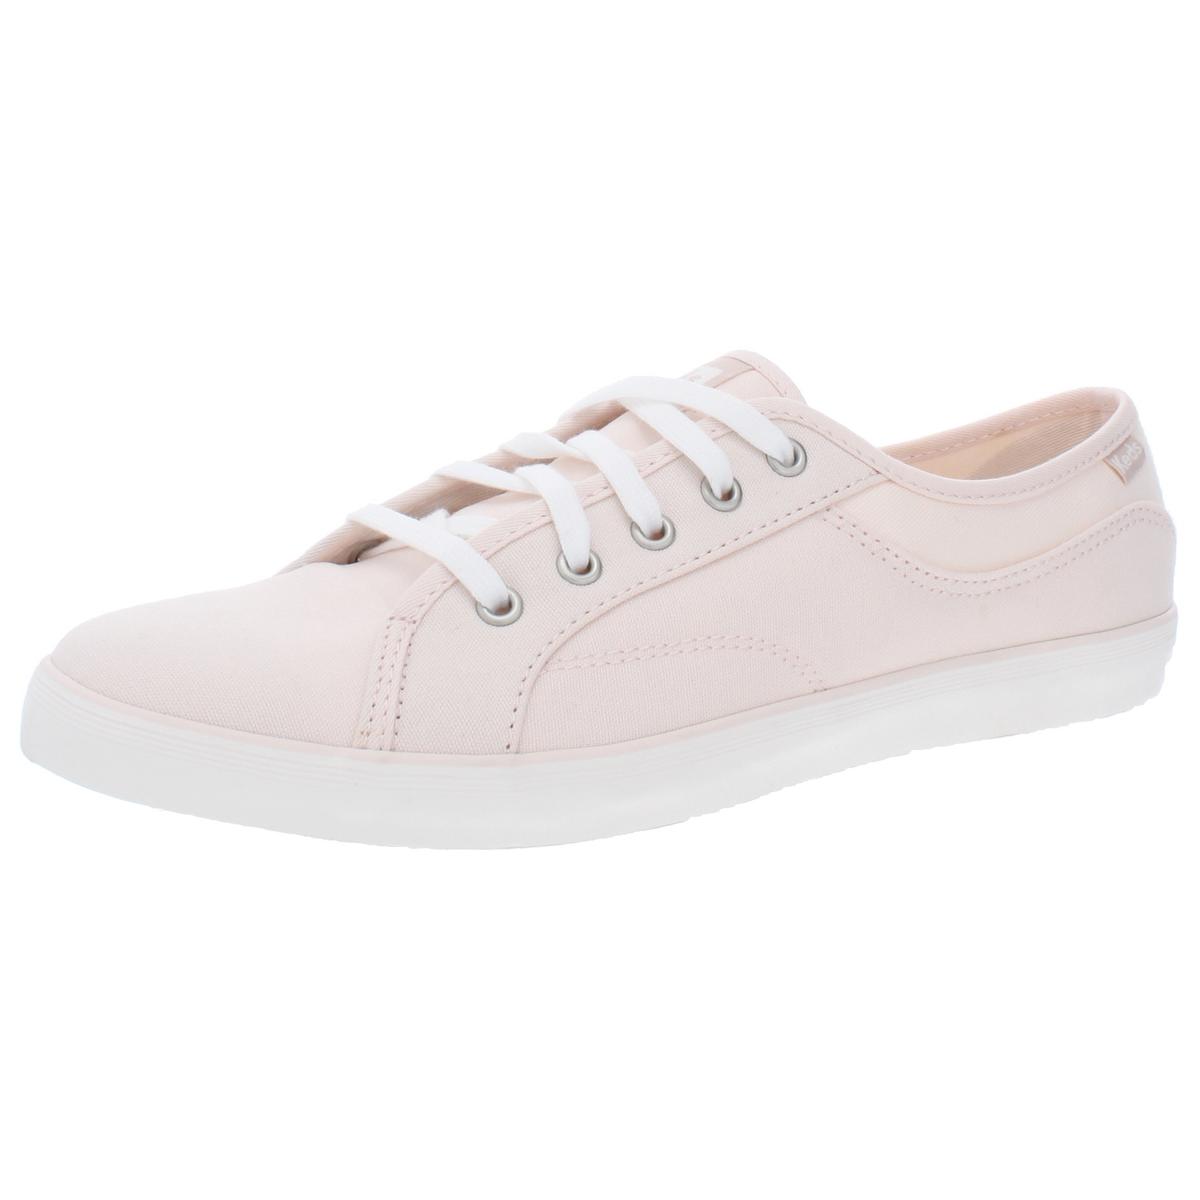 Keds Womens Coursa Pink Canvas Lace Up Sneakers Shoes 9.5 Medium (B,M ...